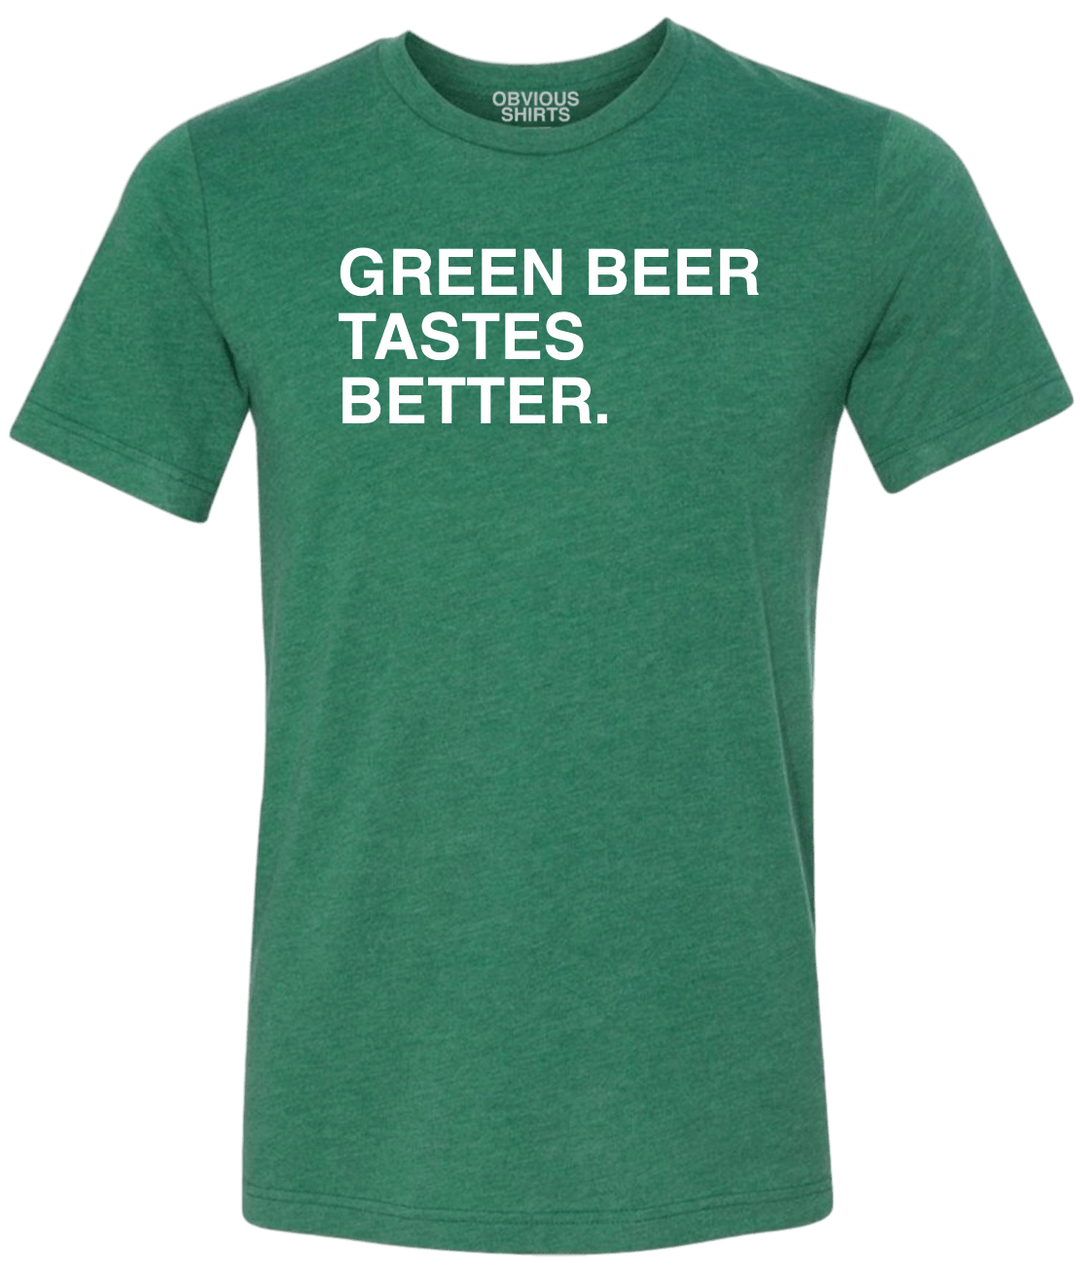 GREEN BEER TASTES BETTER. - OBVIOUS SHIRTS.